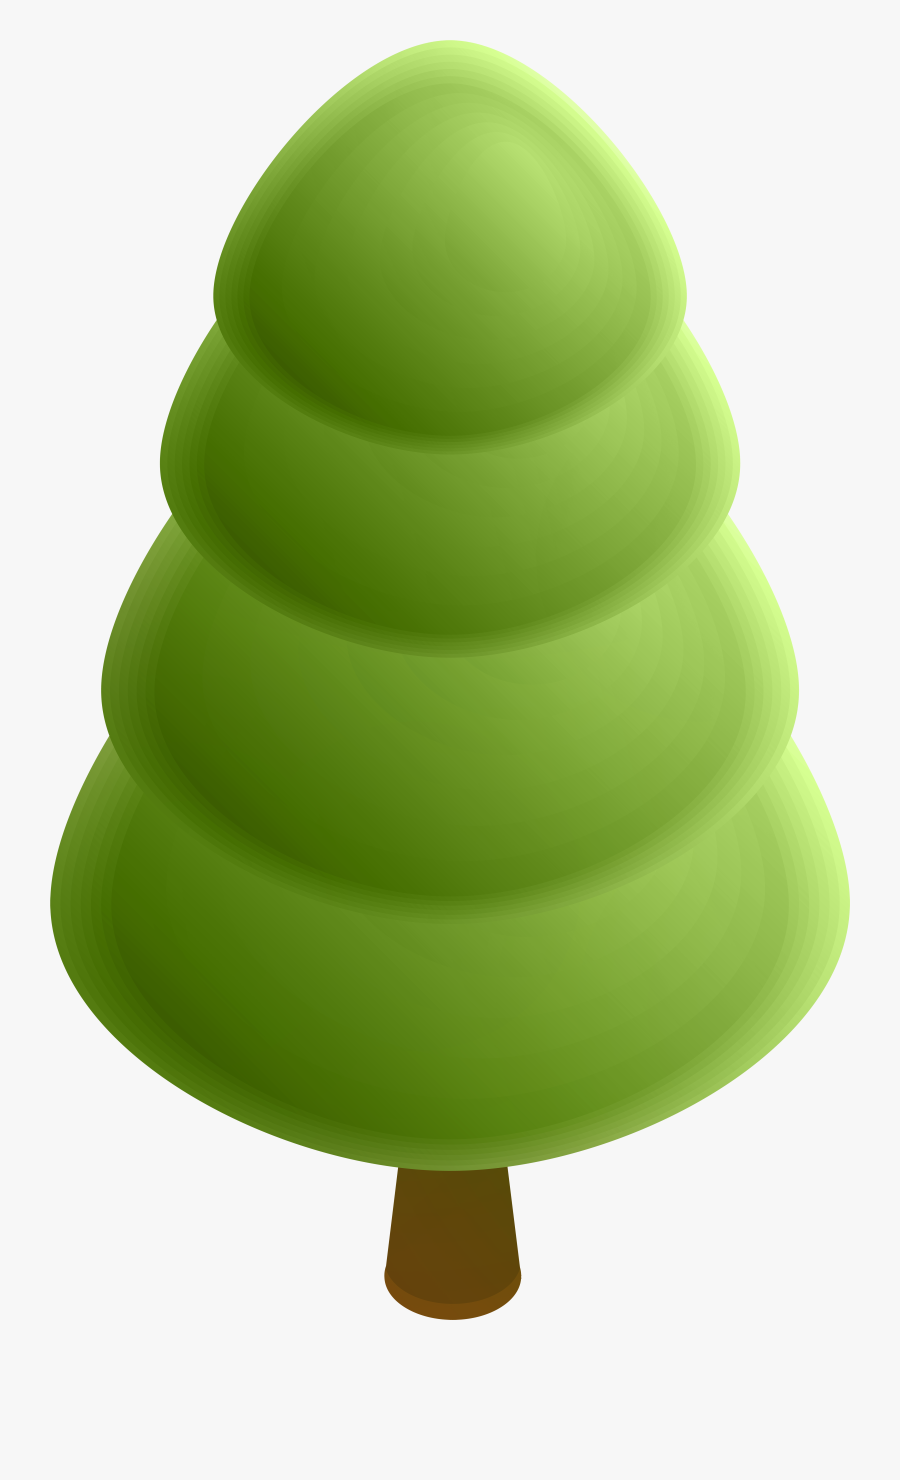 Pine Tree Png Clip Art Image, Is Available For Free - Circle, Transparent Clipart